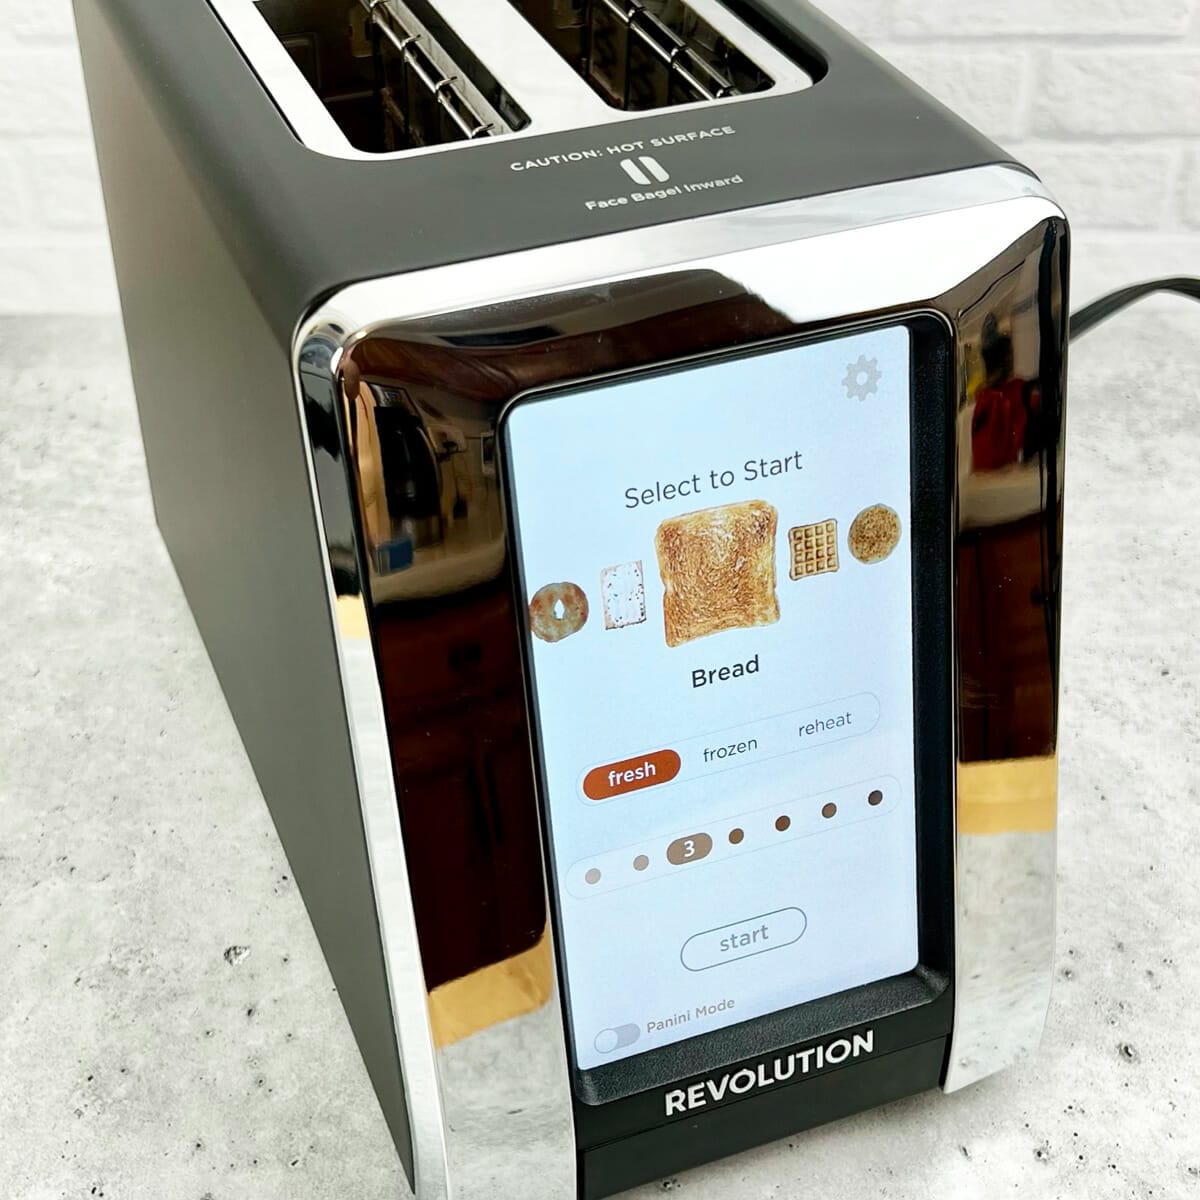 The Revolution InstaGLO R180 Toaster is smart, but overpriced